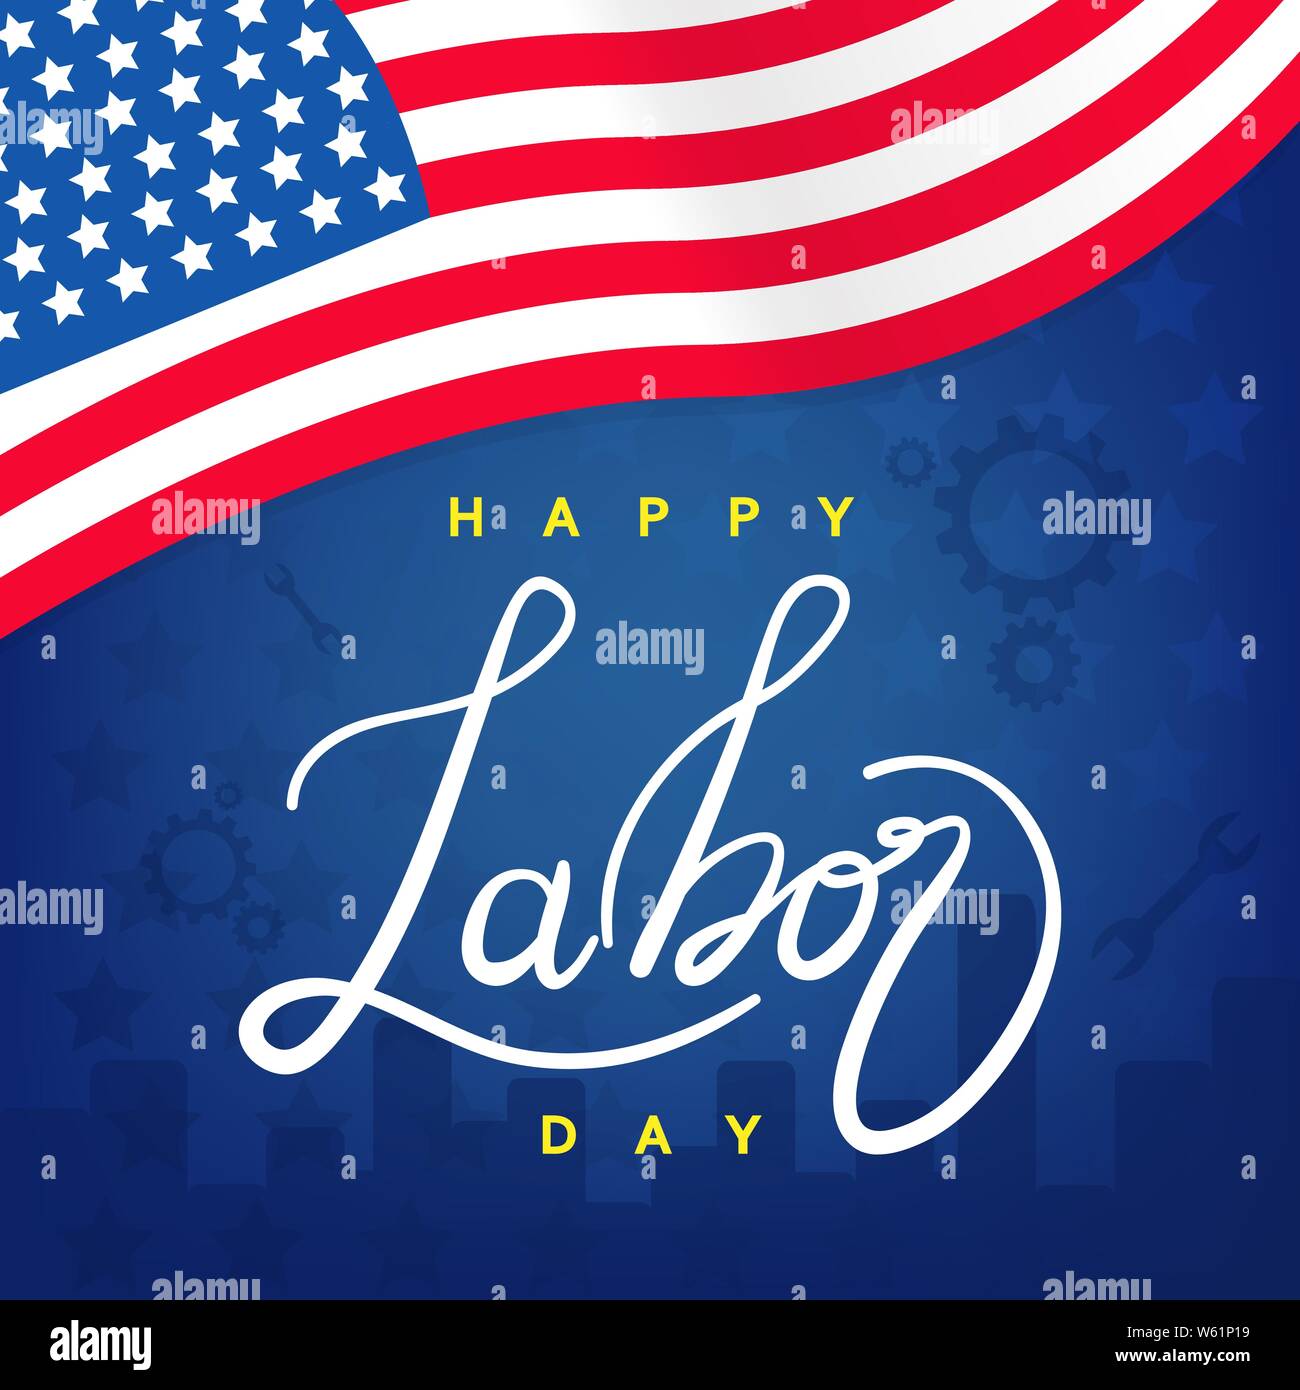 Labor day background design vector template graphic or banners  illustrations Stock Vector